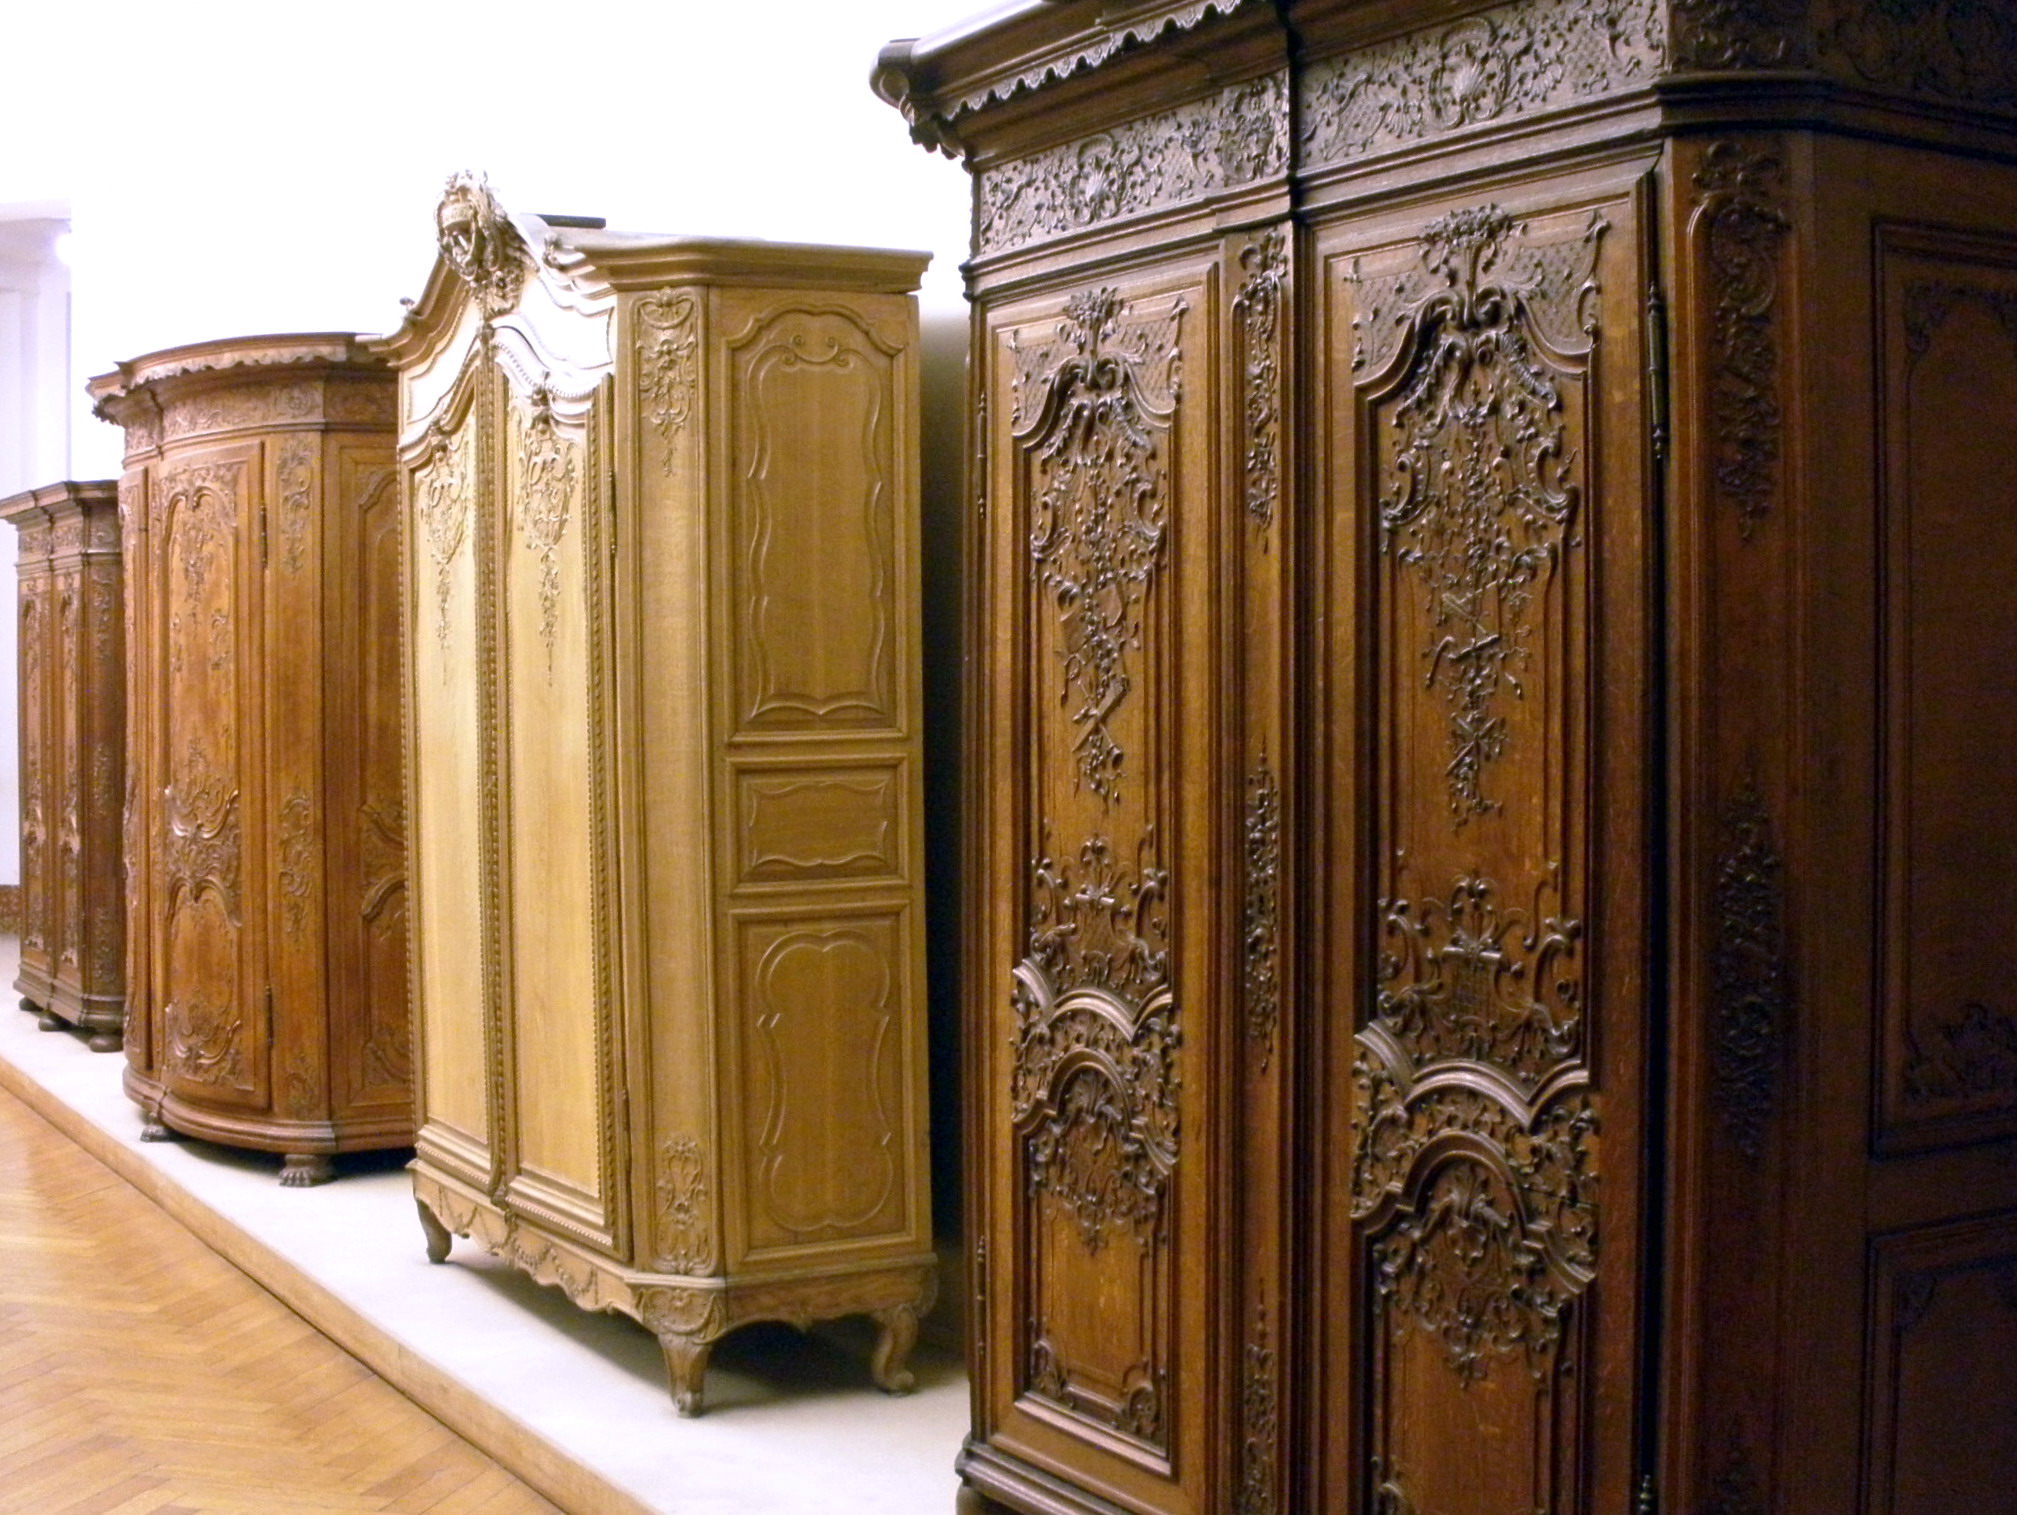 Bewustzijn privaat Druif Bestand:Brussels, Royal Museums of Art and History, 18th c furniture.jpg -  Wikipedia